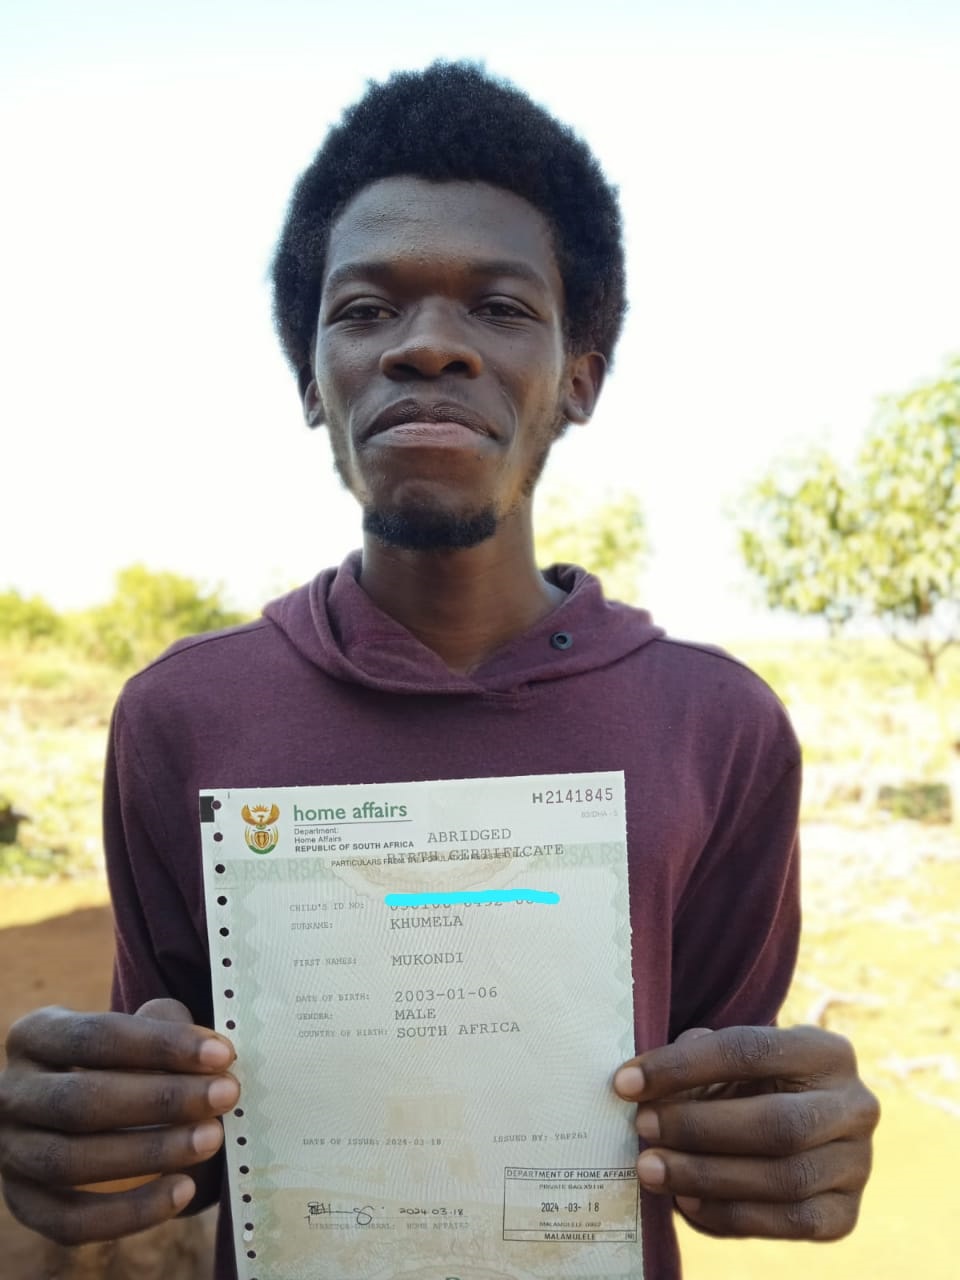 Mukondi Khumela, who has finally obtained his long-awaited birth certificate.